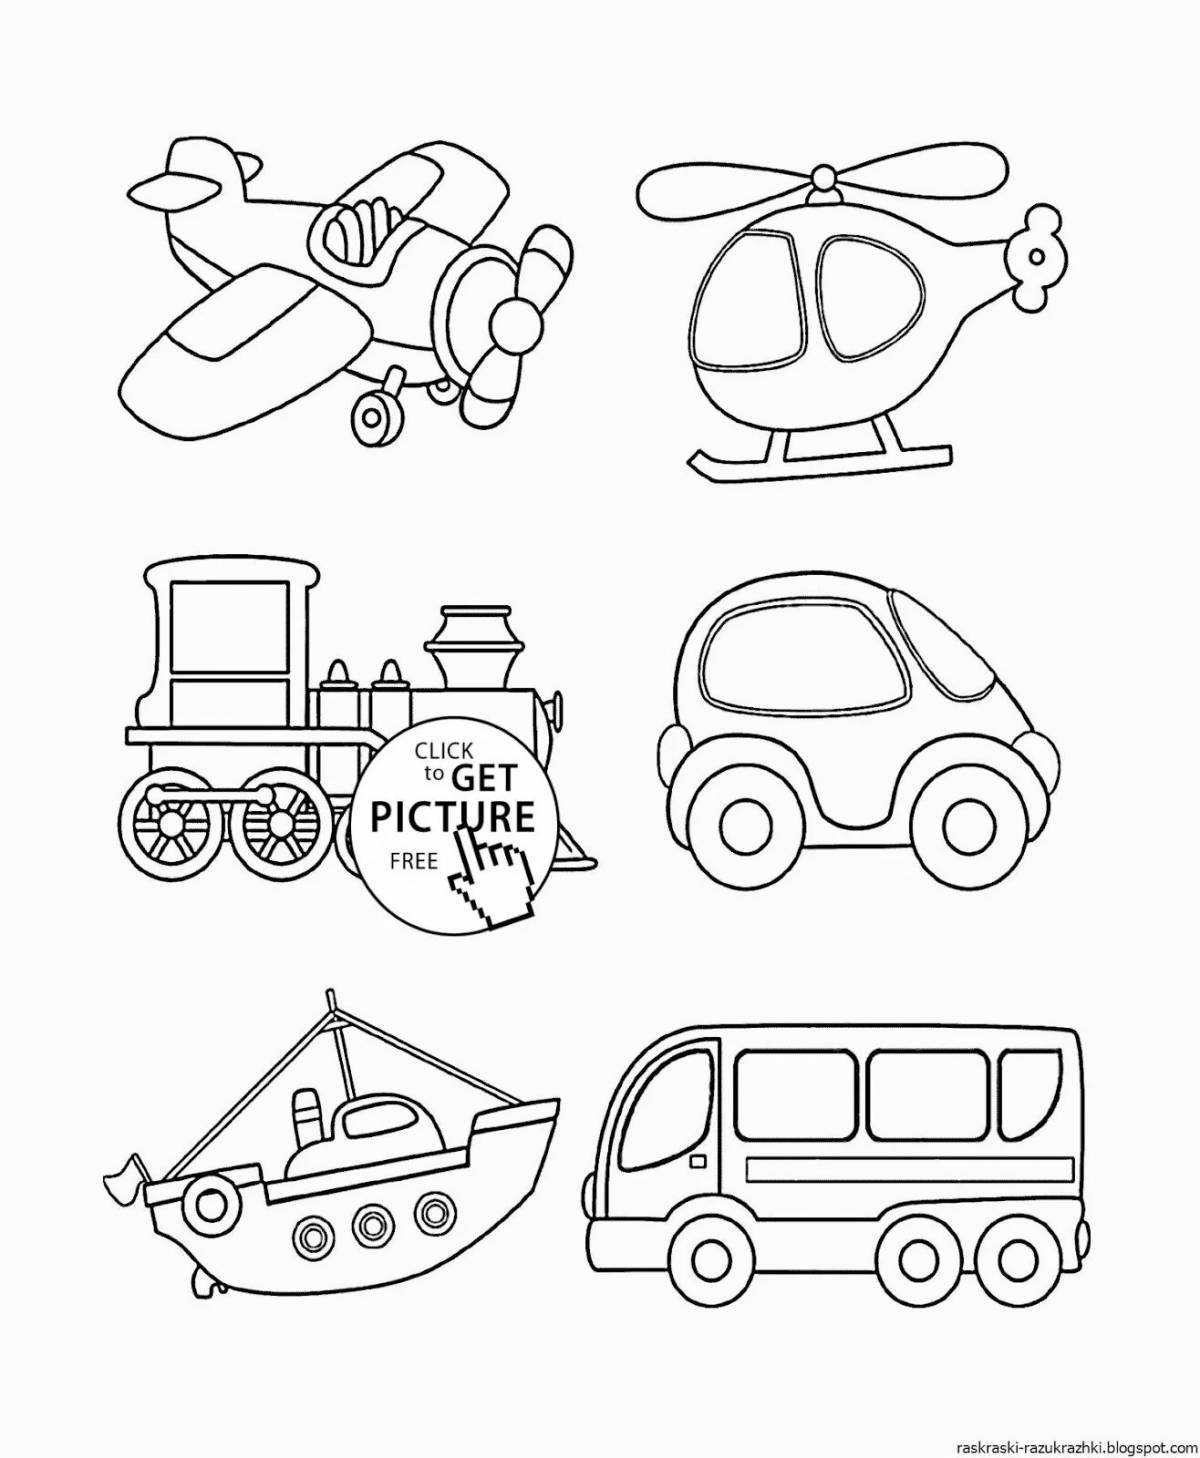 Dynamic transport coloring book for children 3-4 years old